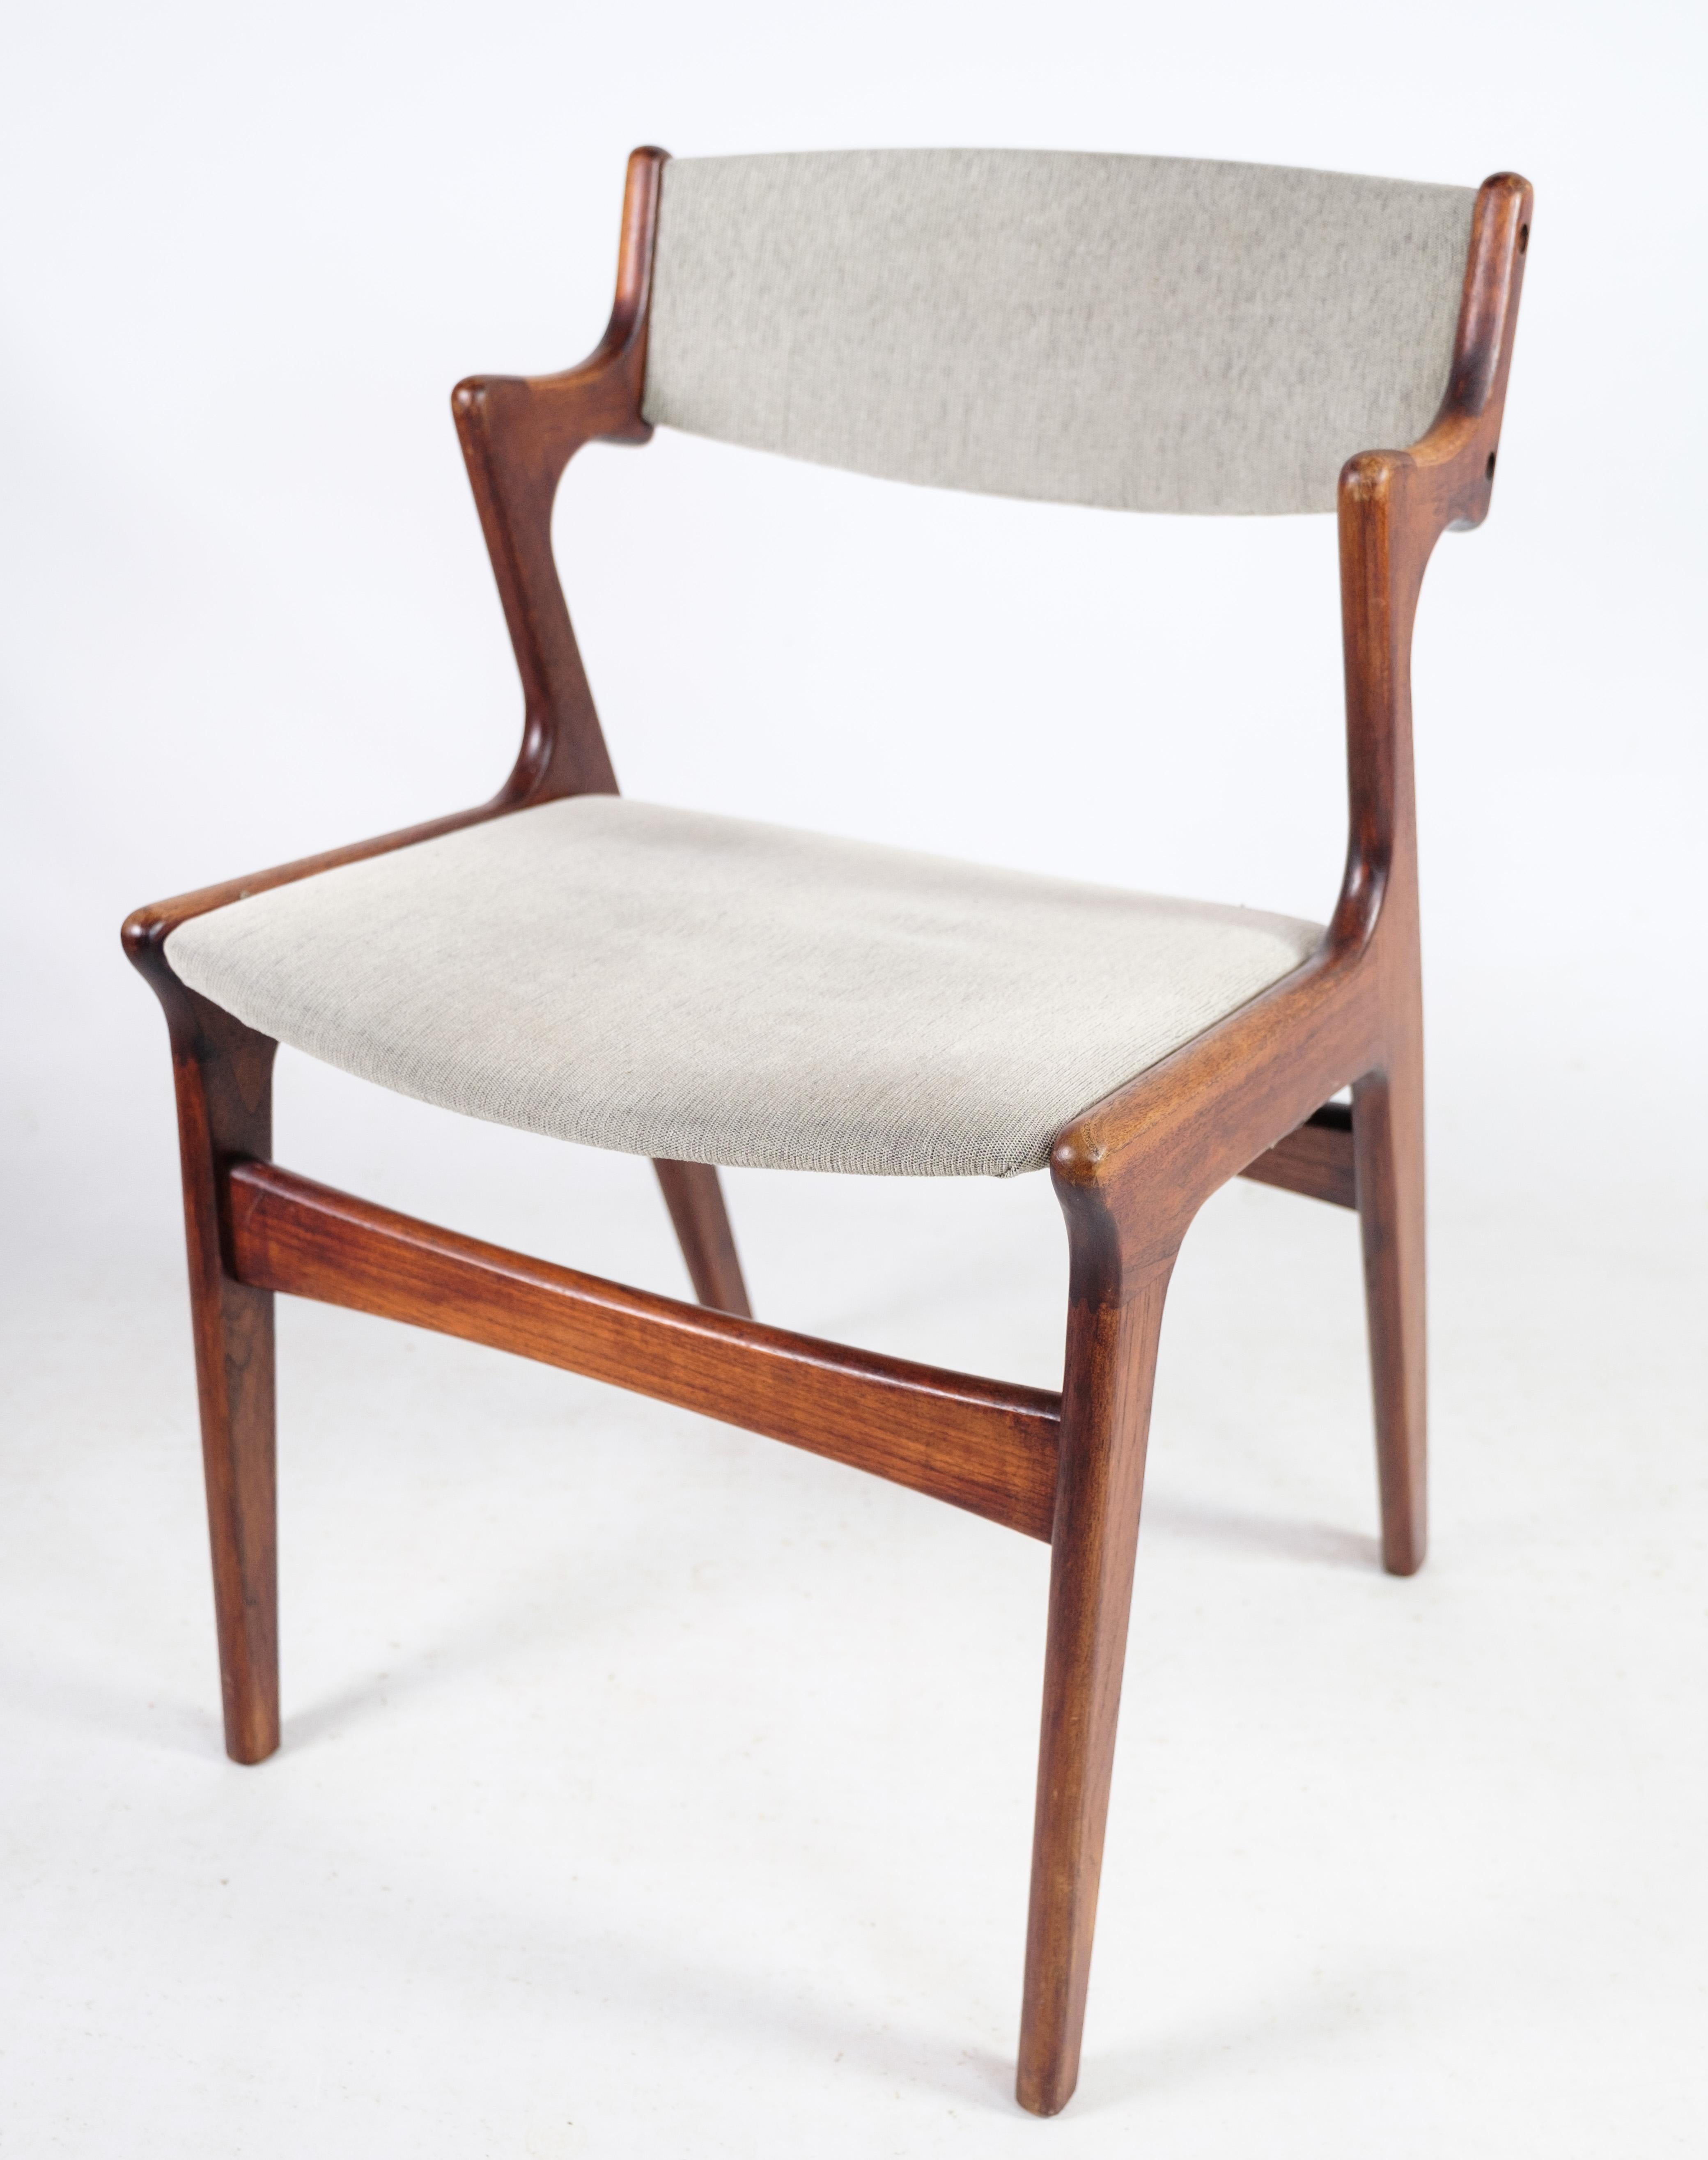 Set of 4 Dining Chairs, Teak, Nova Furniture, 1960s For Sale 8